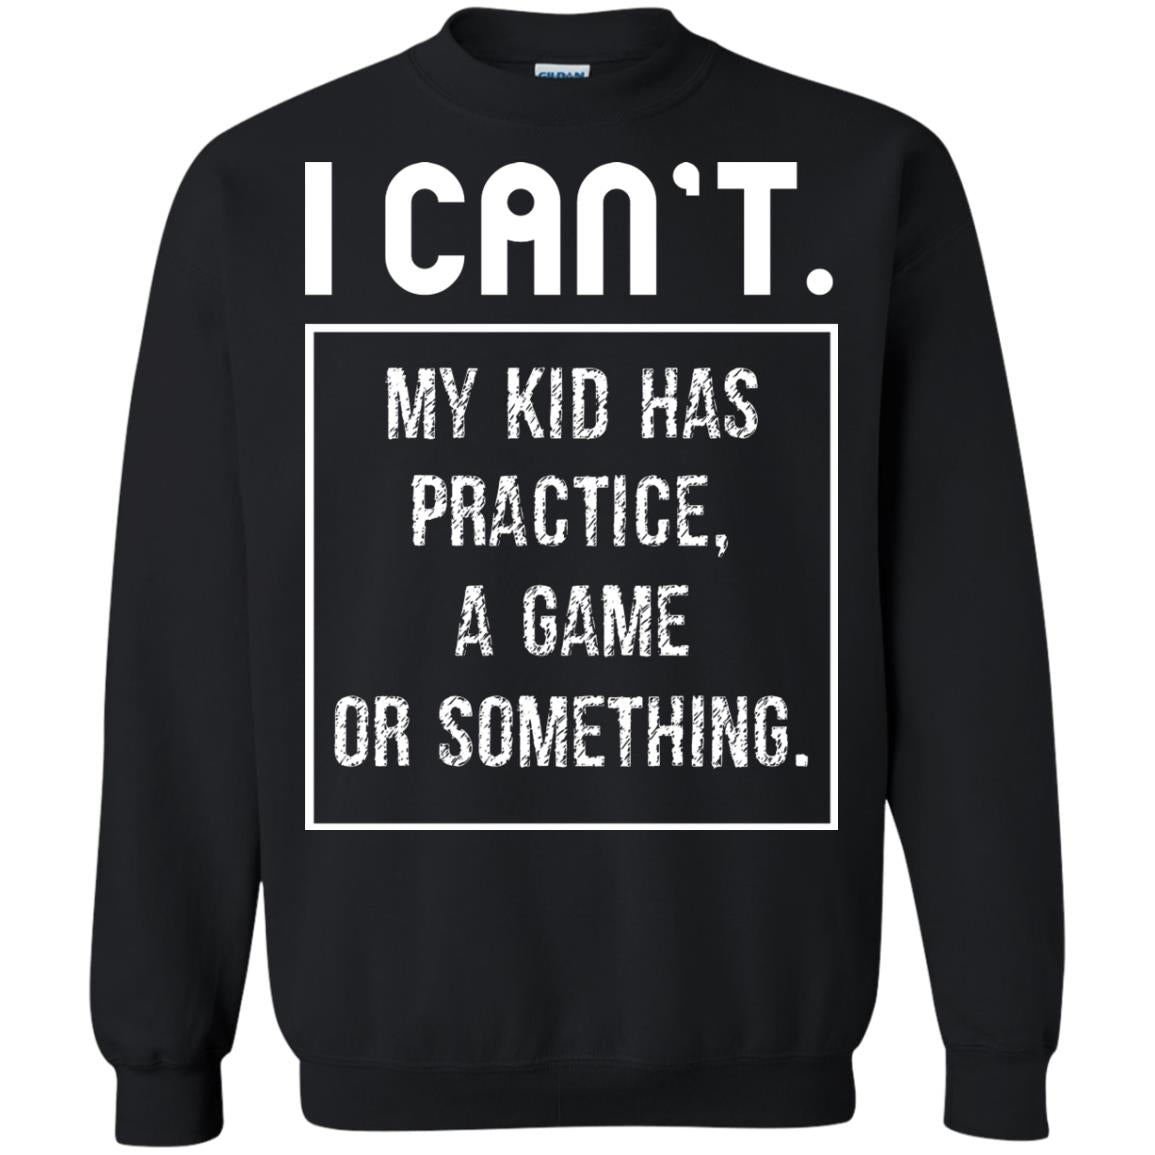 I Can_t. My Kid Has Practice, A Game Or Something Funny Gift Shirt For Parents